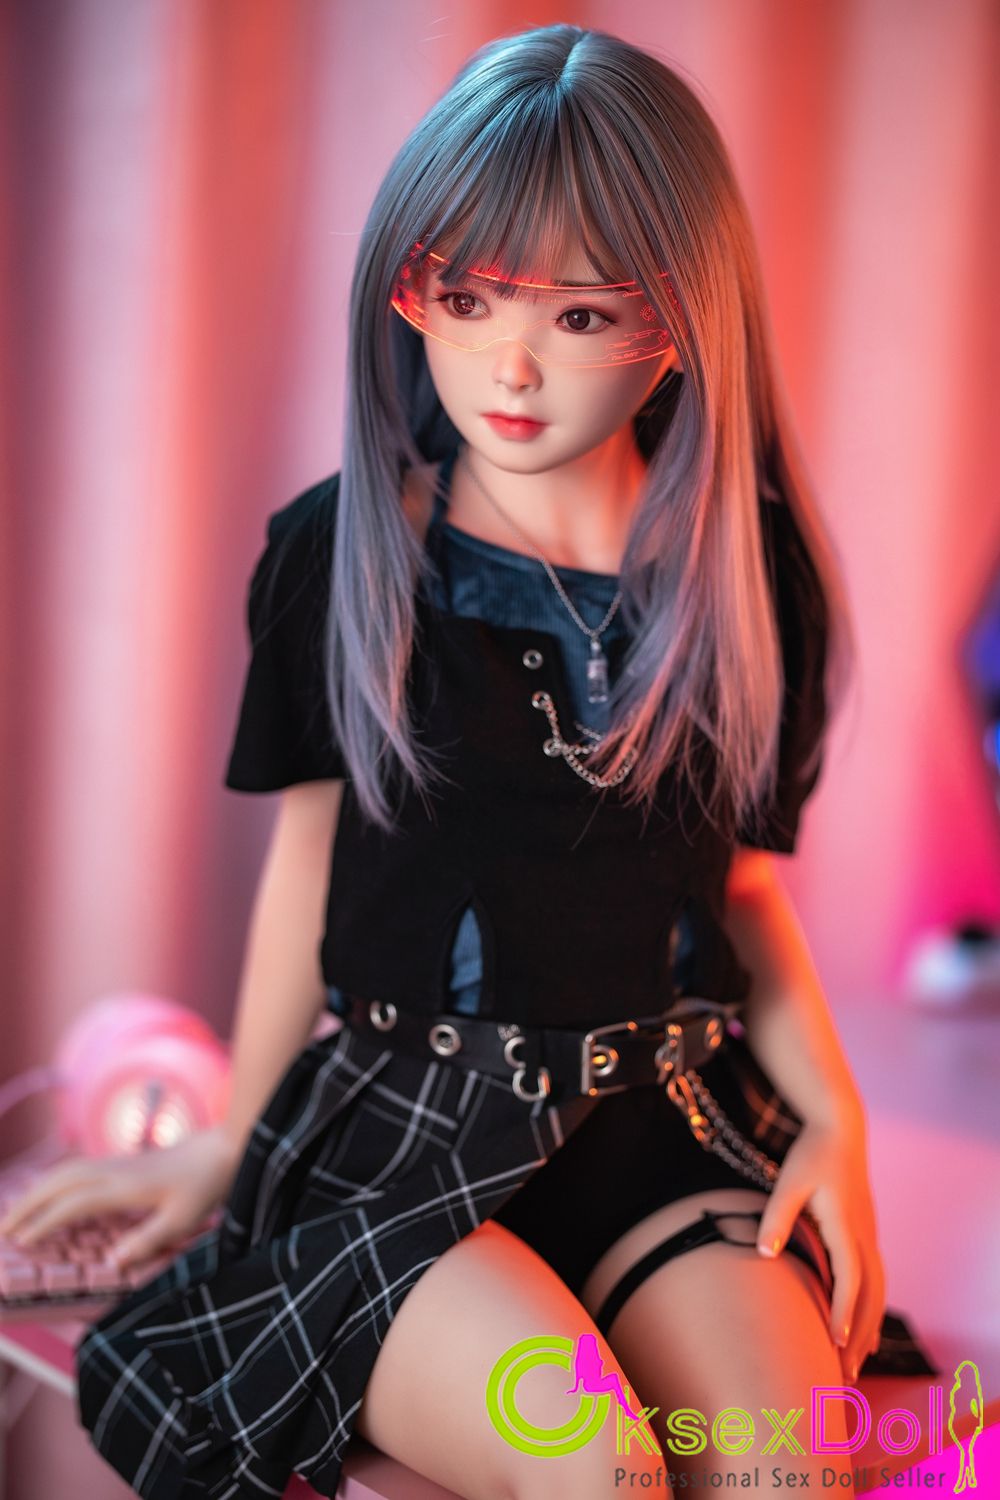 Silm real doll pic